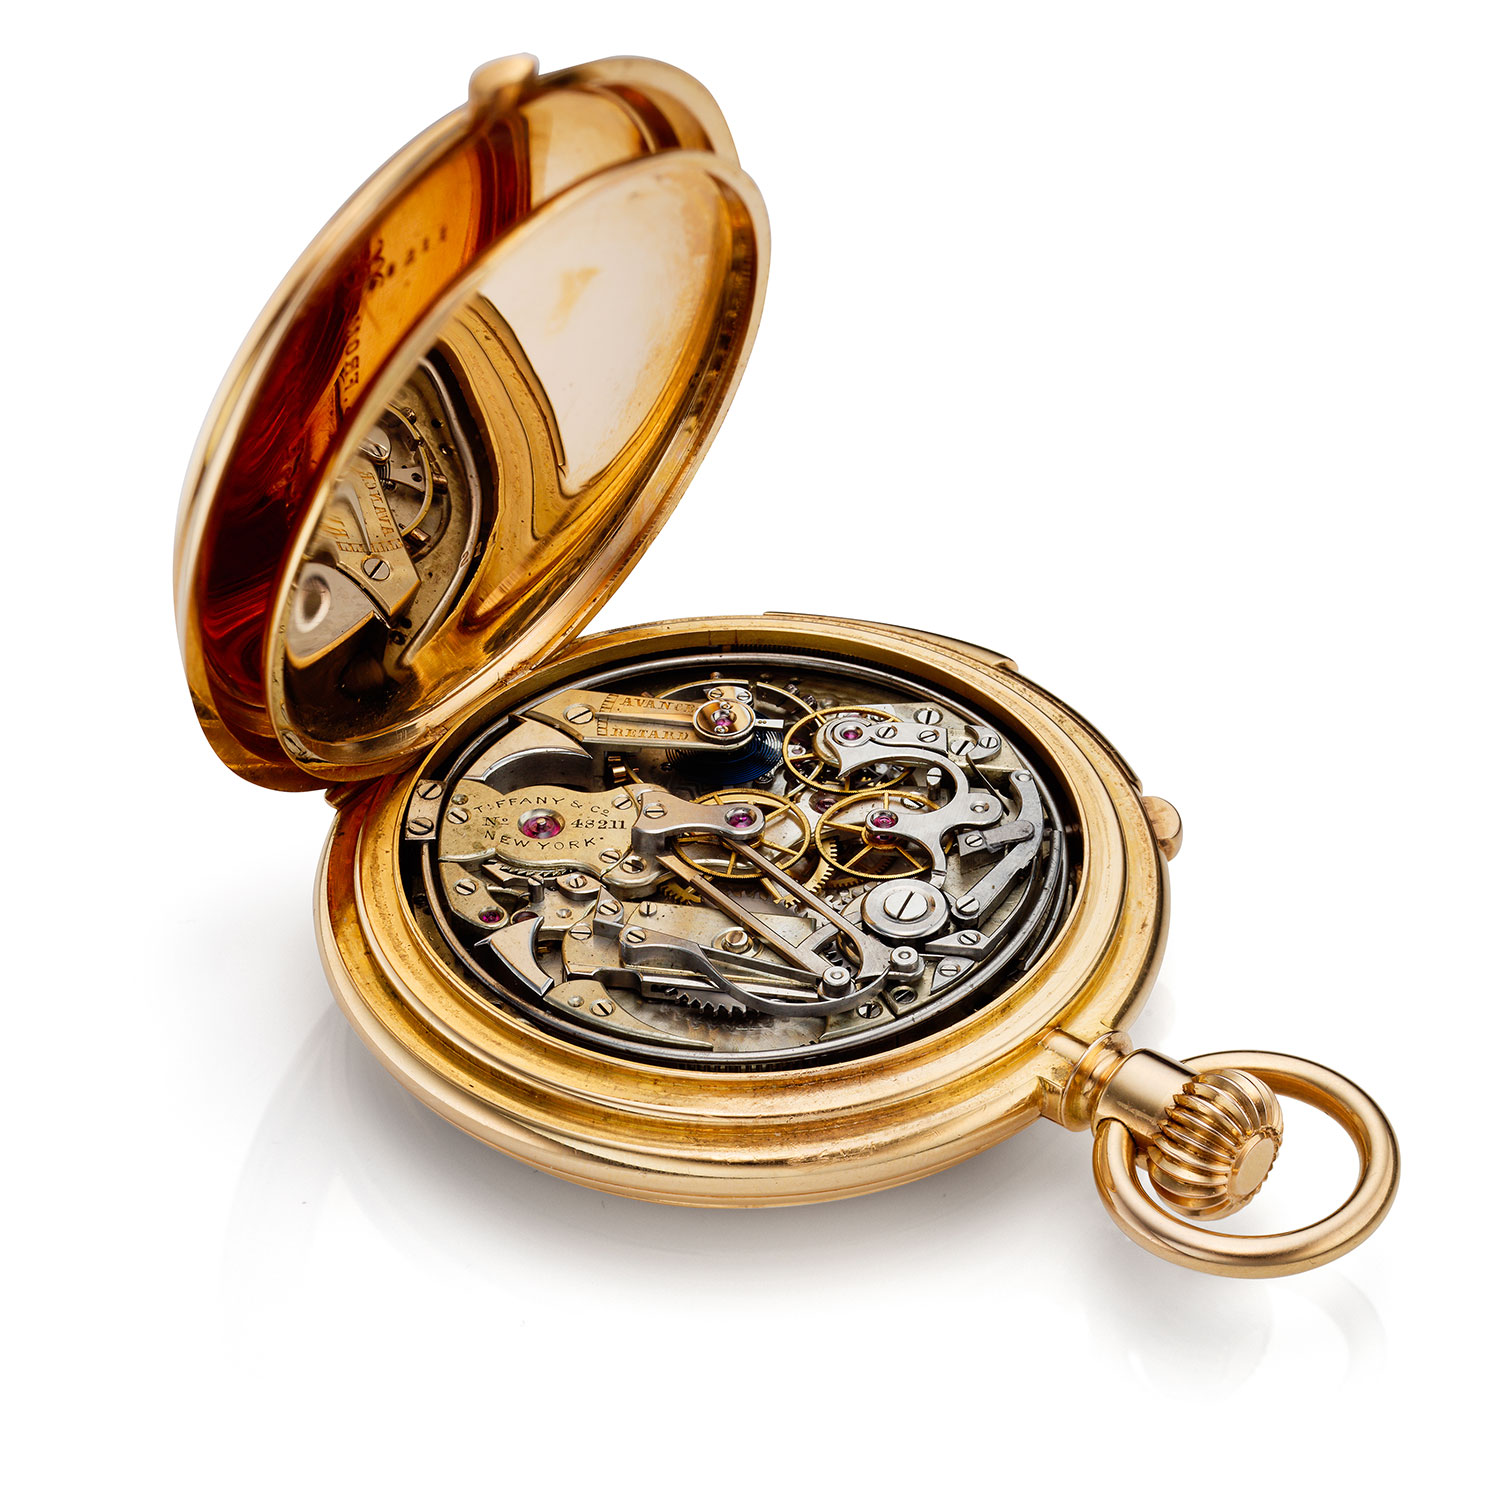 PATEK PHILIPPE MINUTE REPEATING CHRONOGRAPH POCKET WATCH - Collectability